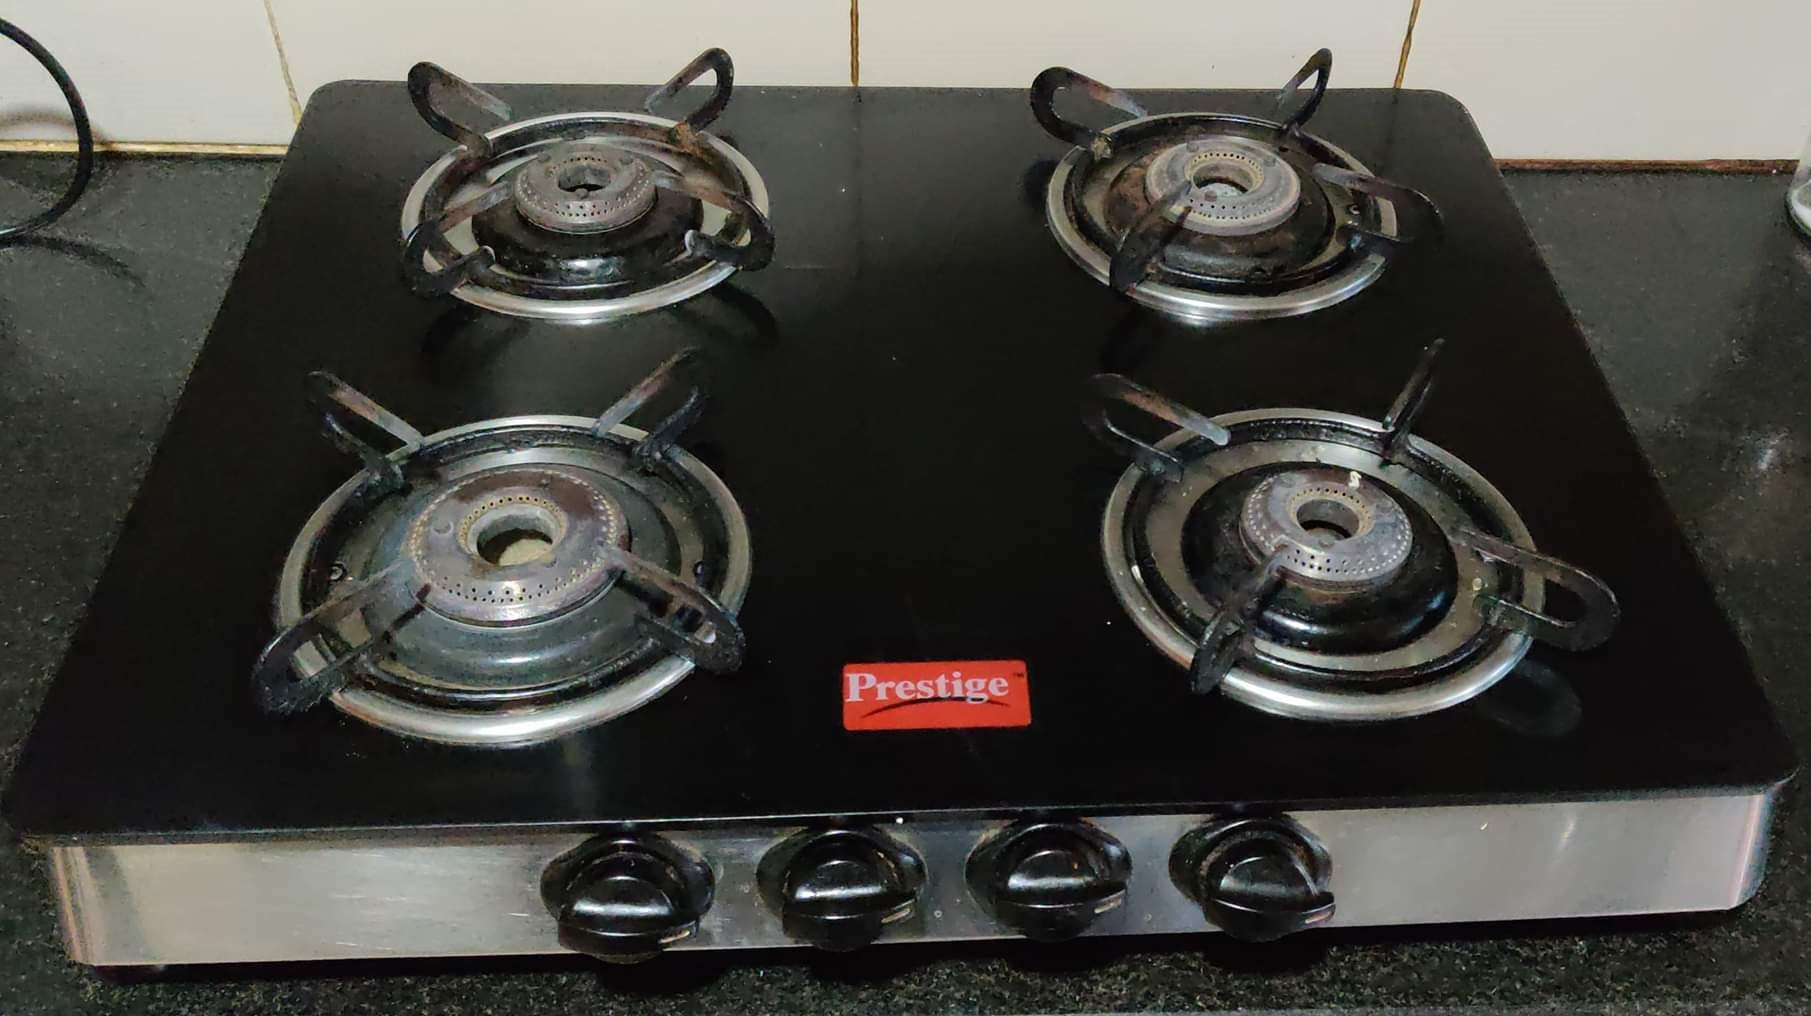 4 nos Gas stove Burner suitable for Prestige Gas Stove (only 4 Burners not Full Stove) 2S2M - Faritha